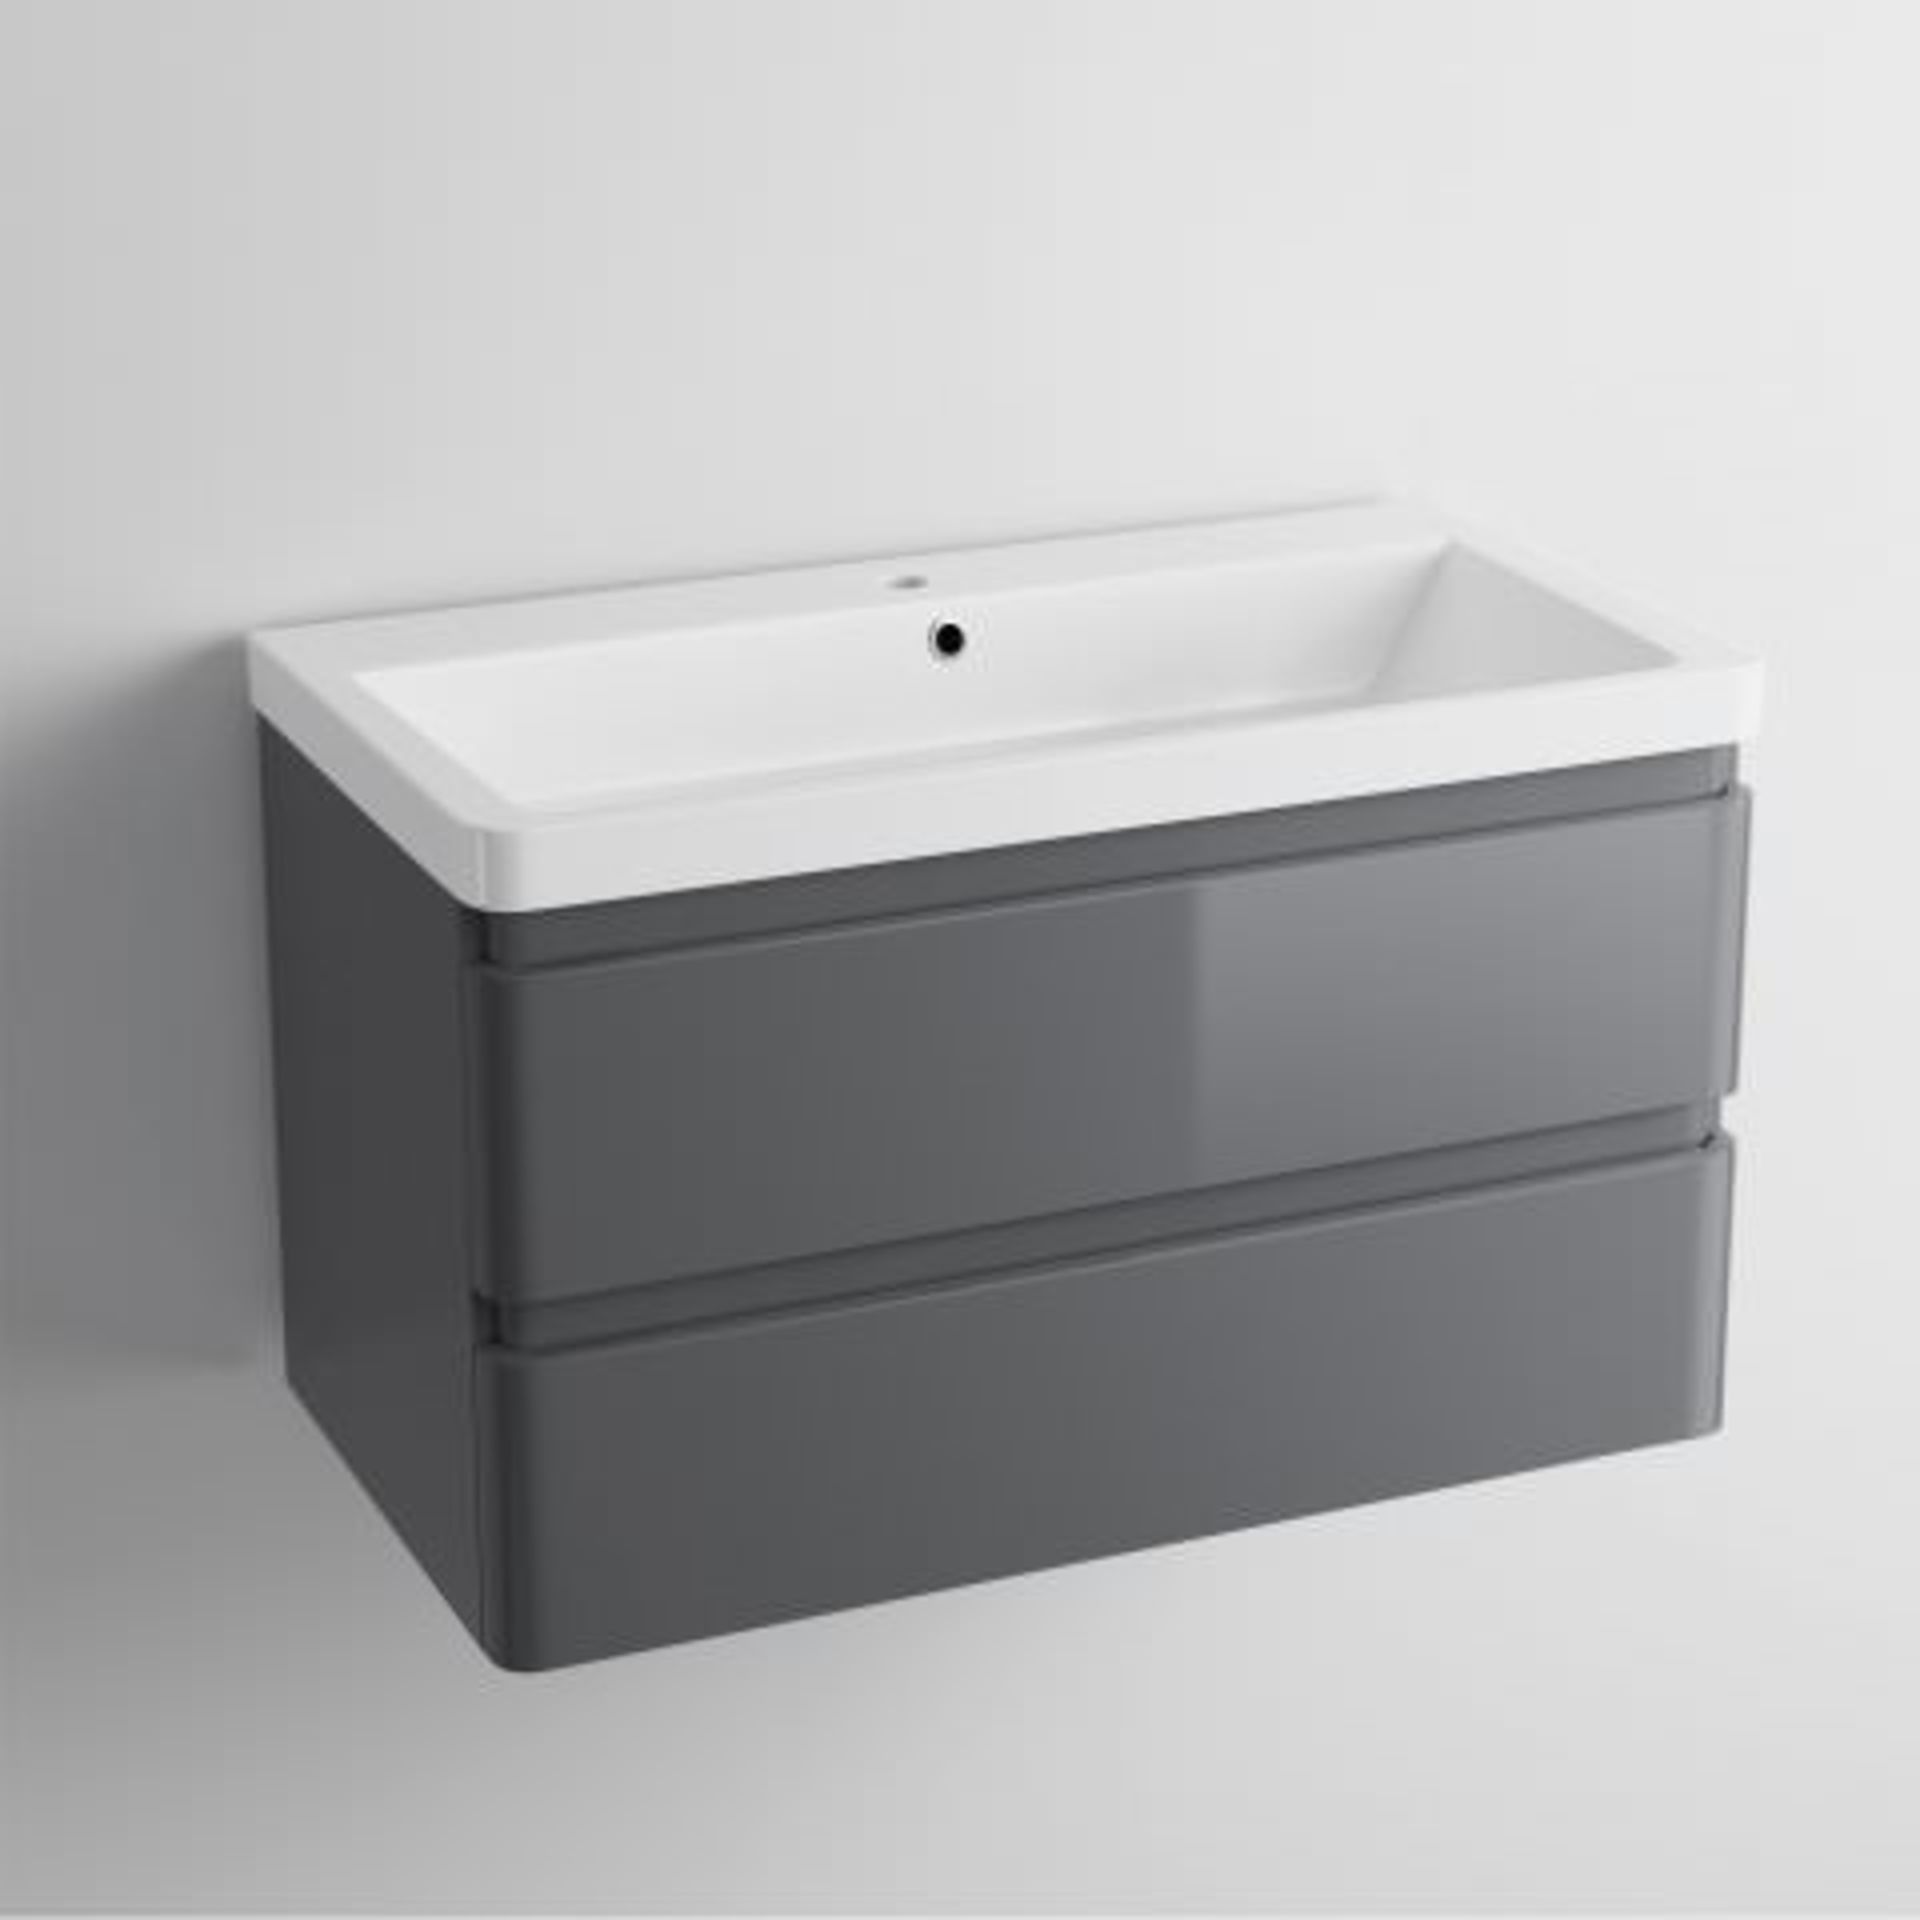 (T4) 800mm Denver II Gloss Grey Built In Basin Drawer Unit - Wall Hung. RRP £599.99. COMES - Image 3 of 3